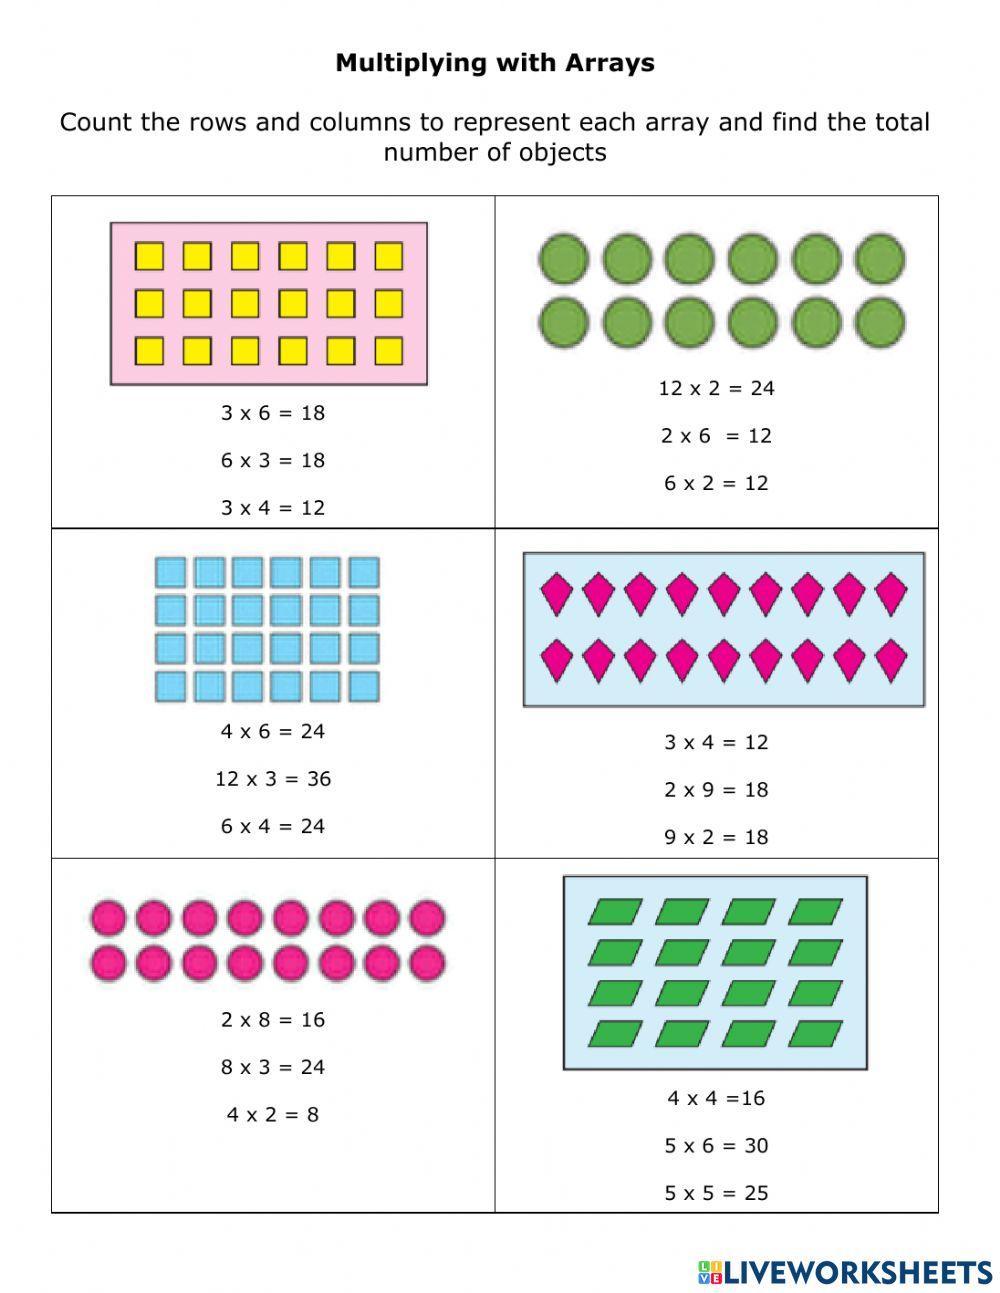 Multiplying with arrays